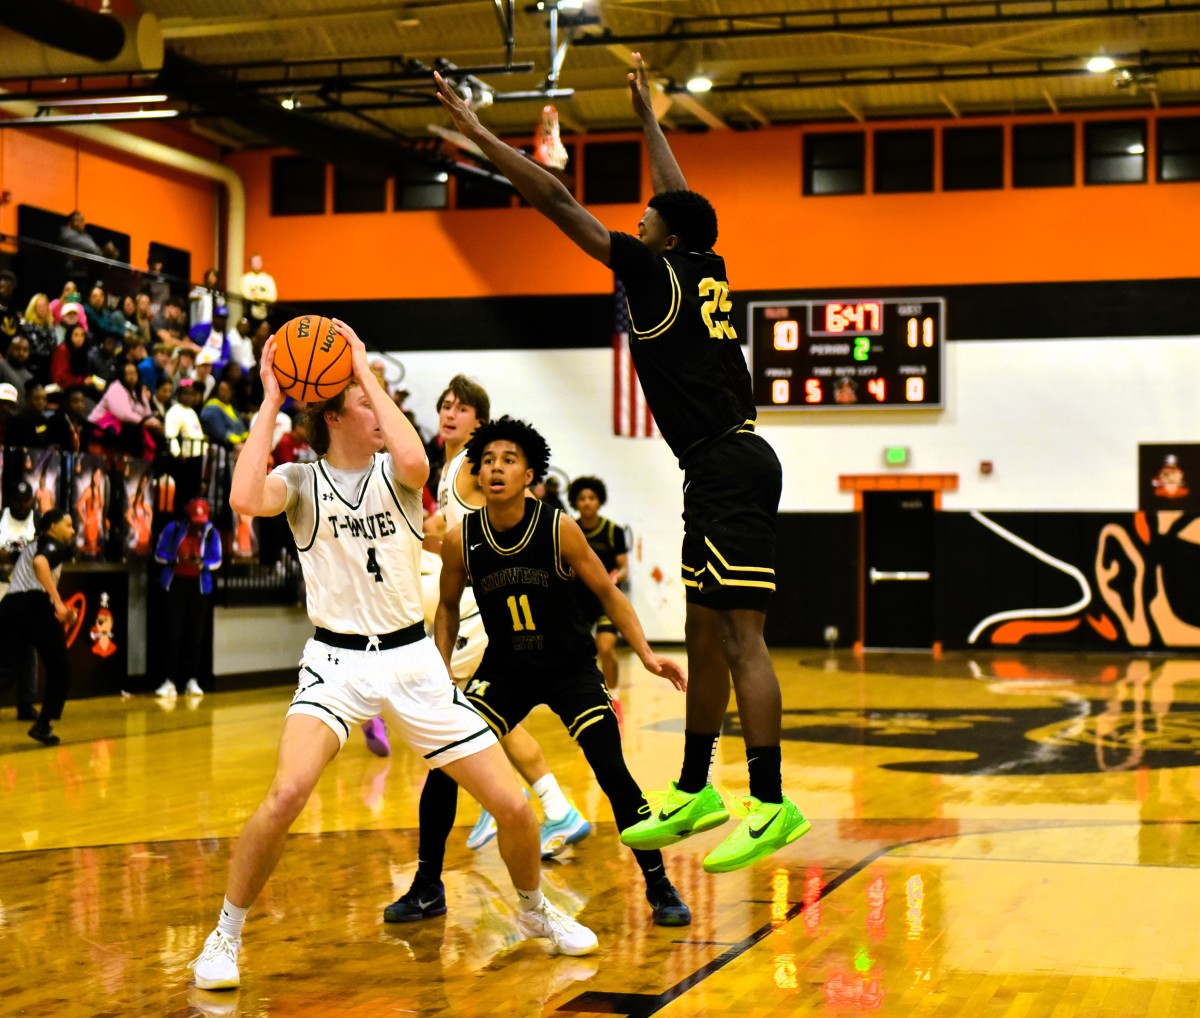 Midwest City boys roll to decisive win against Norman North for Putnam